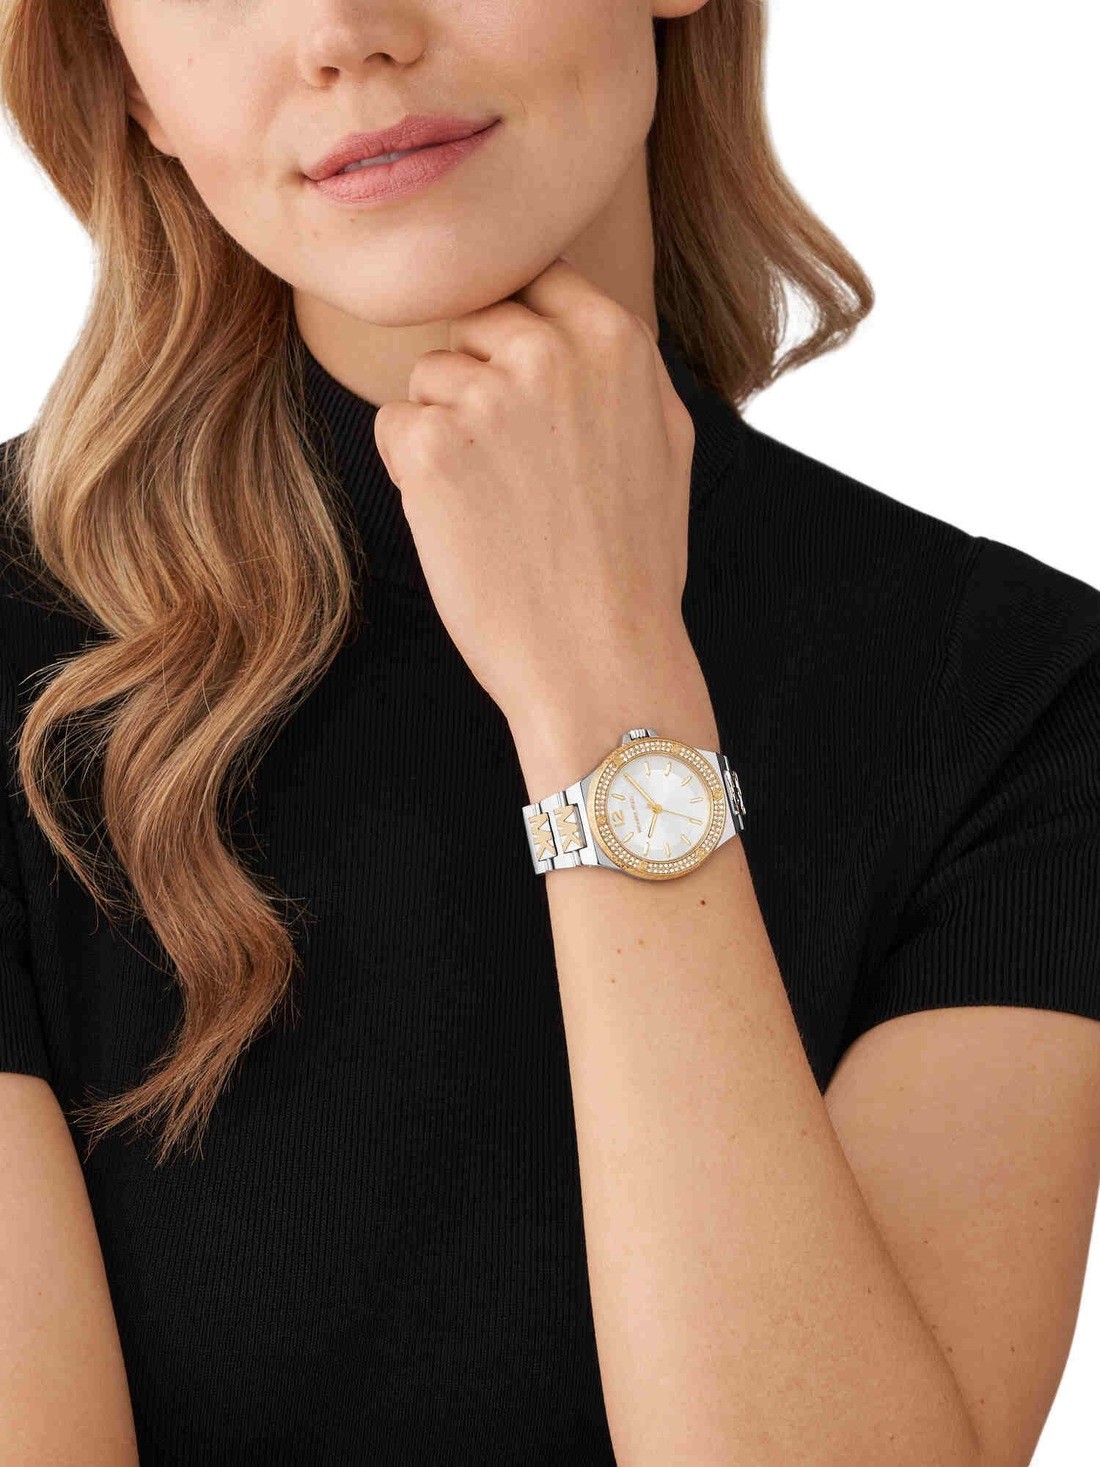 MICHAEL KORS NEW ZEALAND  MK3979 Michael Kors Lauryn ThreeHand TwoTone  Stainless Steel Watch RRP 50900  Michael Kors Watches NZ Sale  Michael  Kors Smart Watches NZ Mk Watches Afterpay